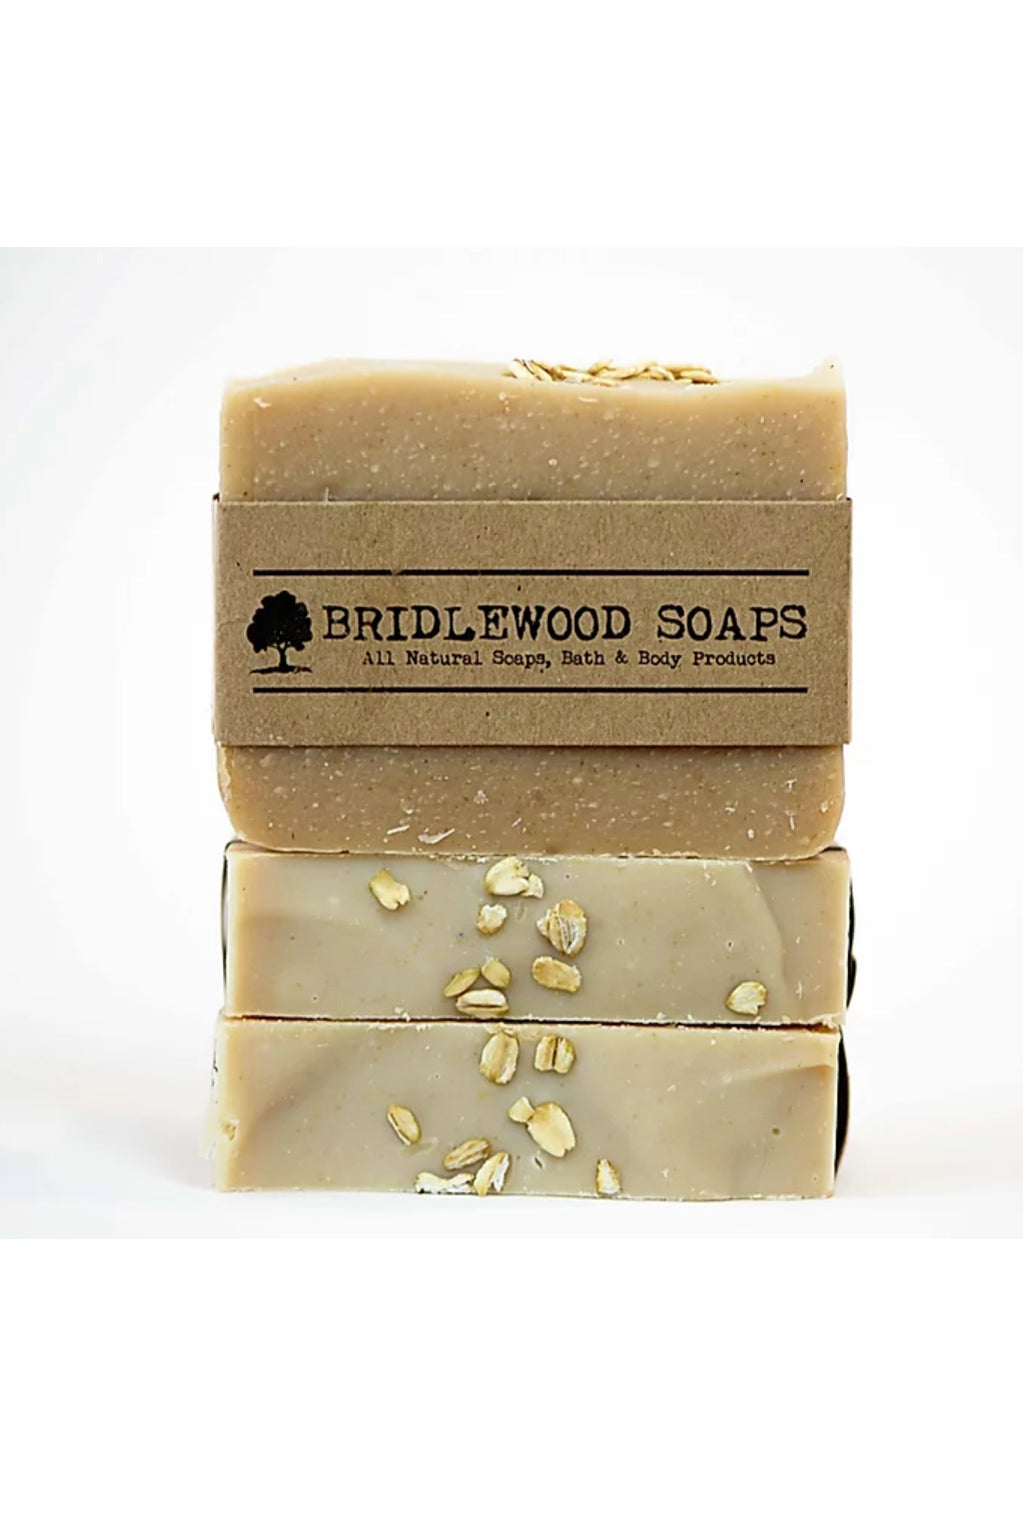 BRIDLEWOOD SOAPS Oatmeal Honey Soap Bar (stacked)